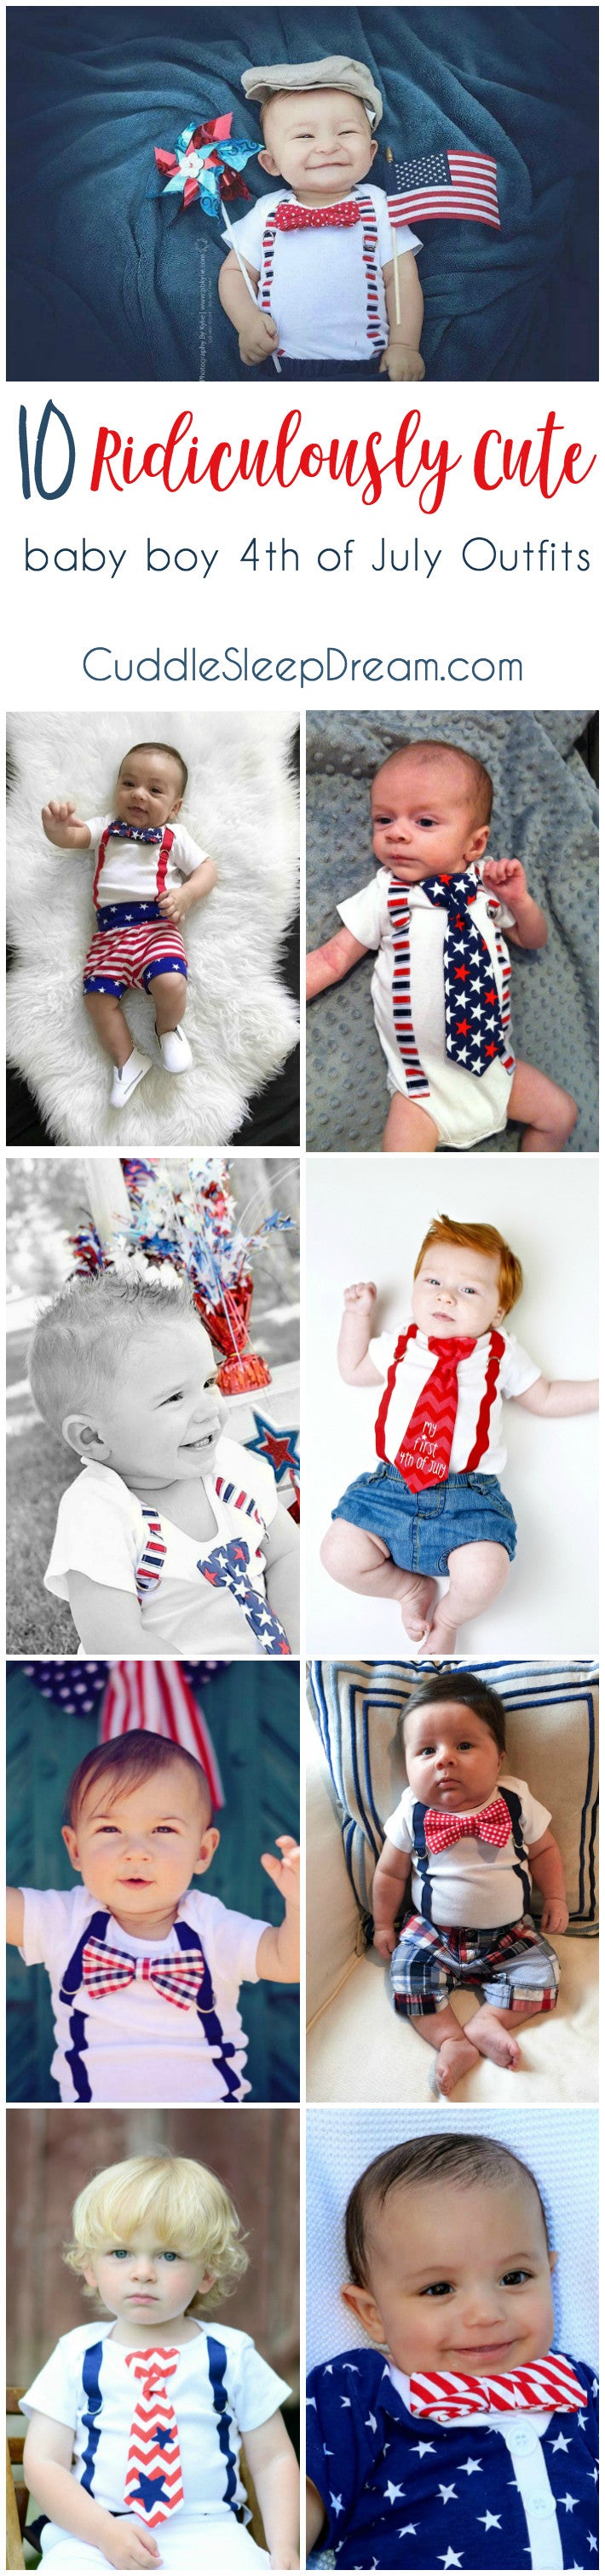 baby boy 4th of july outfit ideas